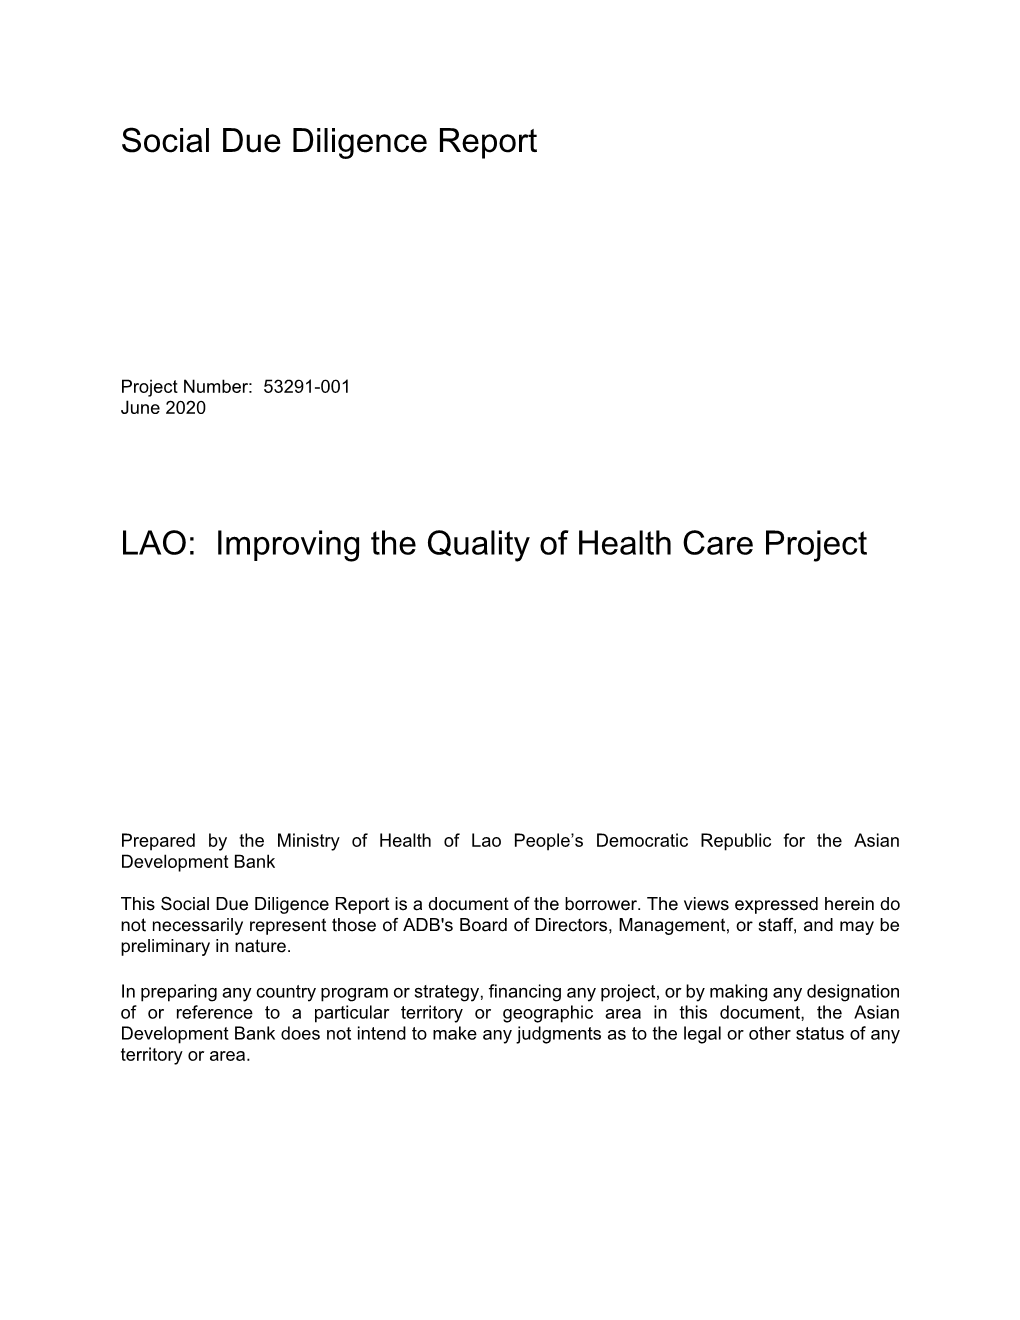 Social Due Diligence Report LAO: Improving the Quality of Health